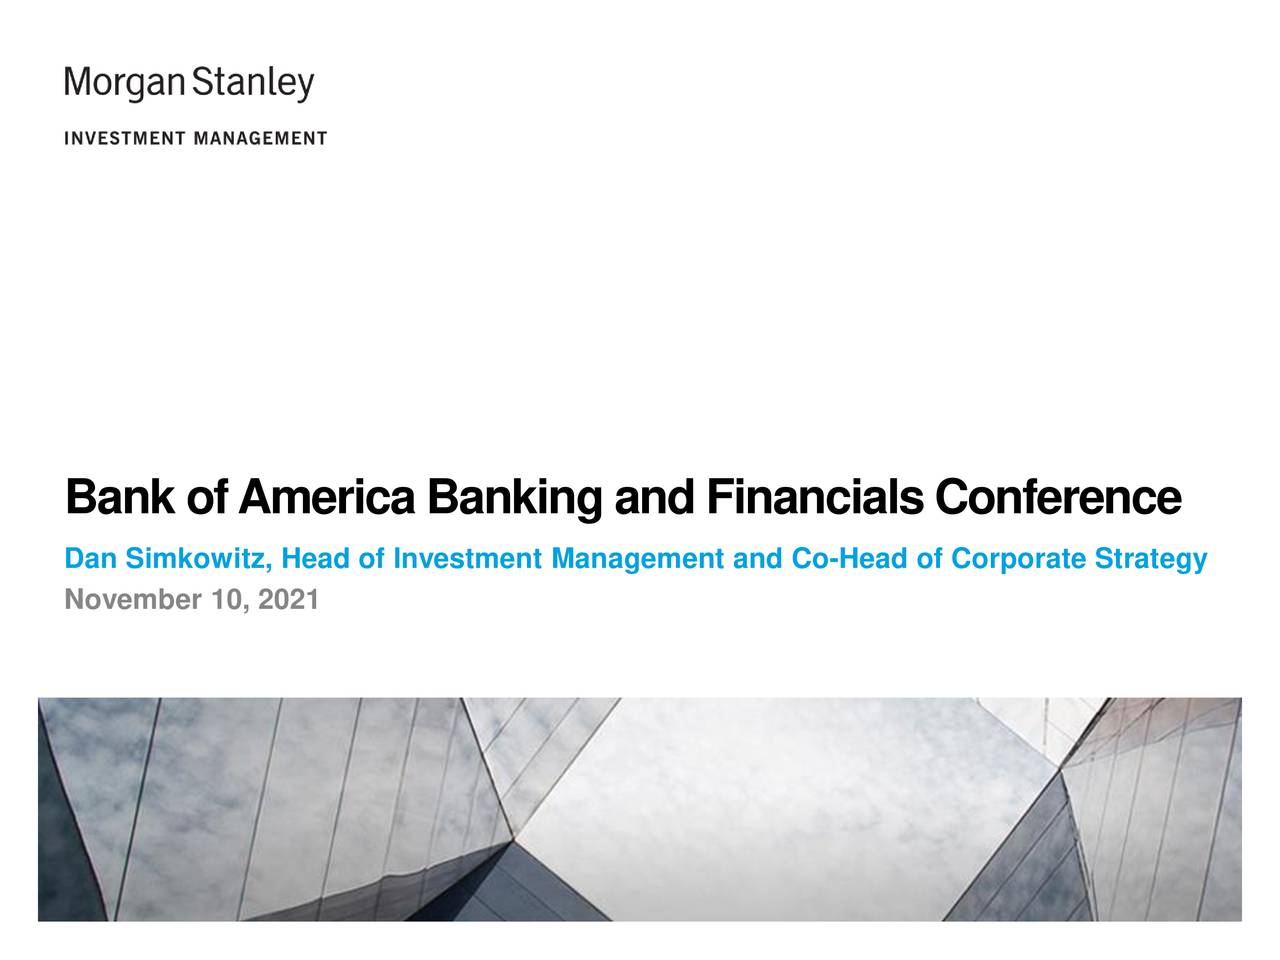 Stanley (MS) Presents At Bank of America Banking and Financials